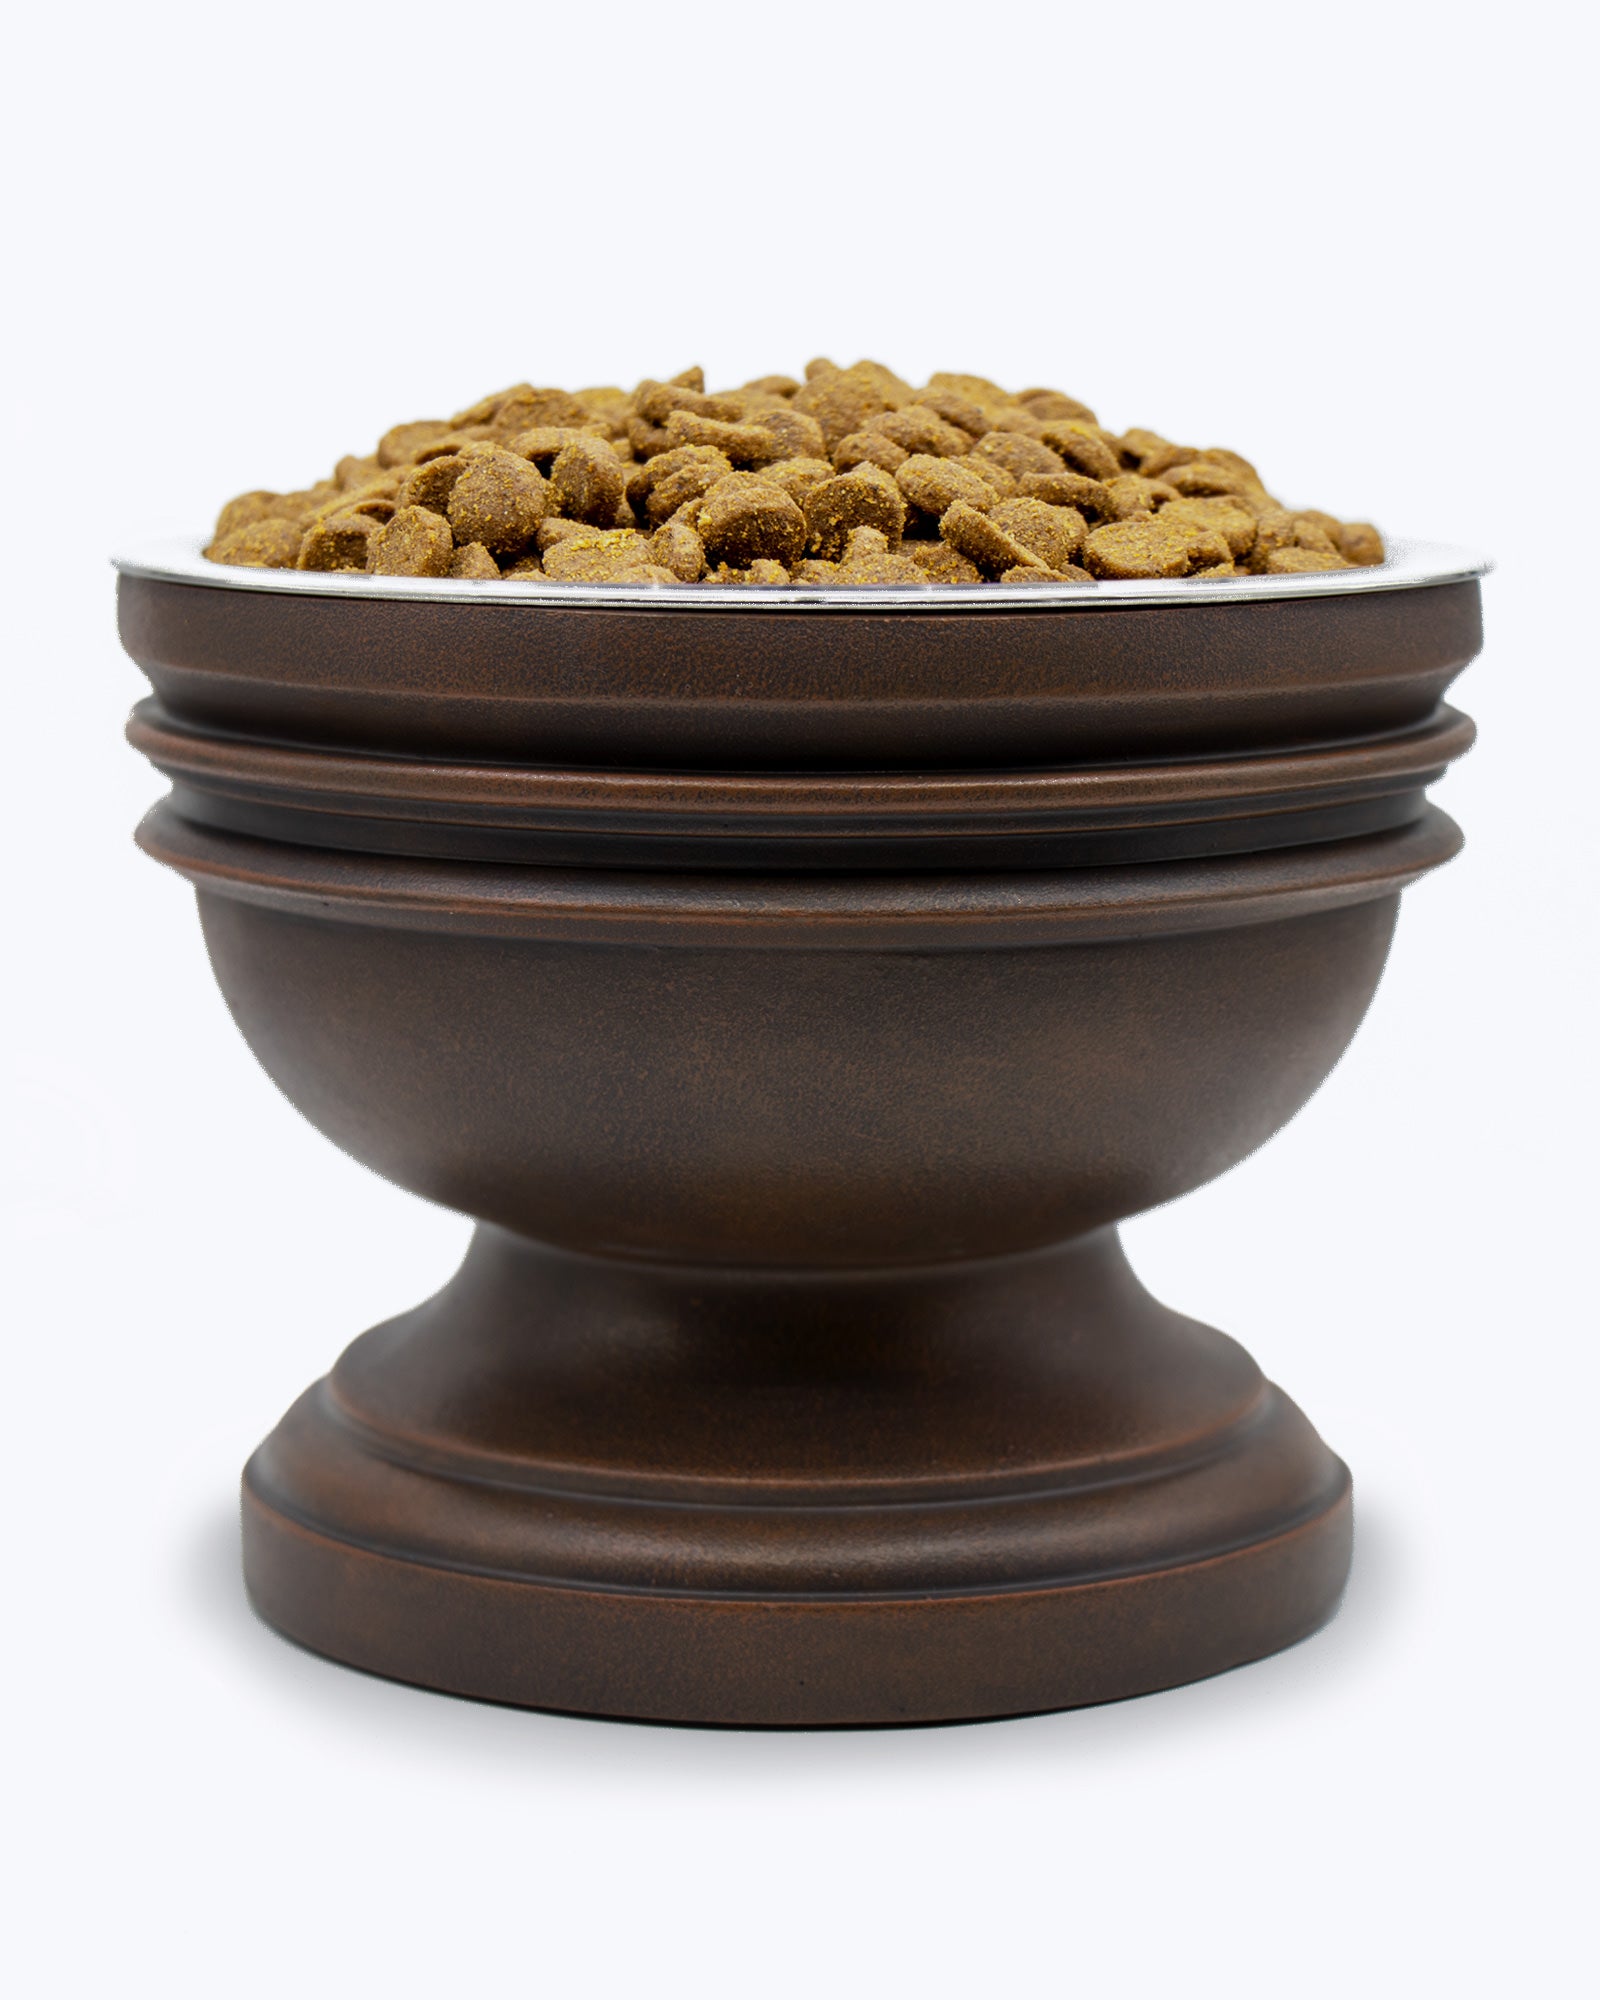 Pet Junkie Elevated Dog Bowl Summit, Small - 5 inch / 16oz, Brown